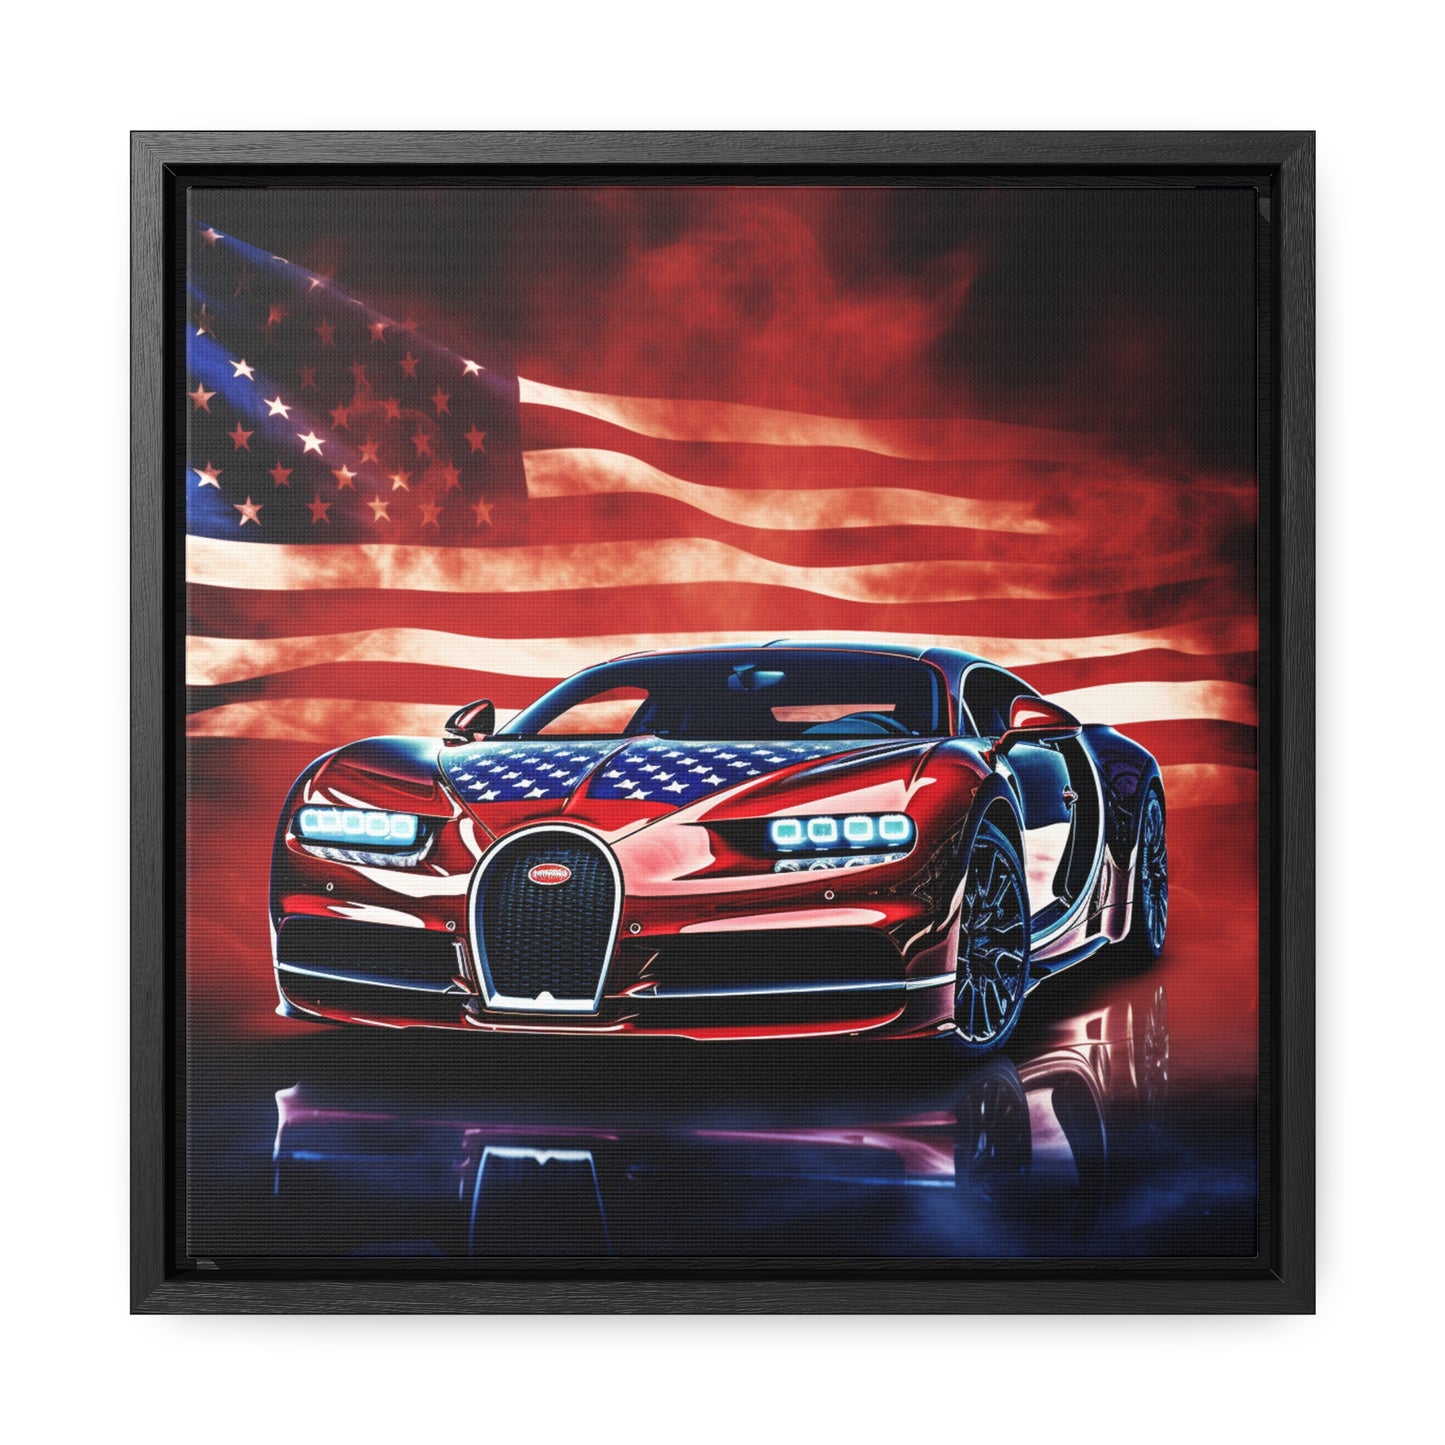 Gallery Canvas Wraps, Square Frame Abstract American Flag Background Bugatti 3